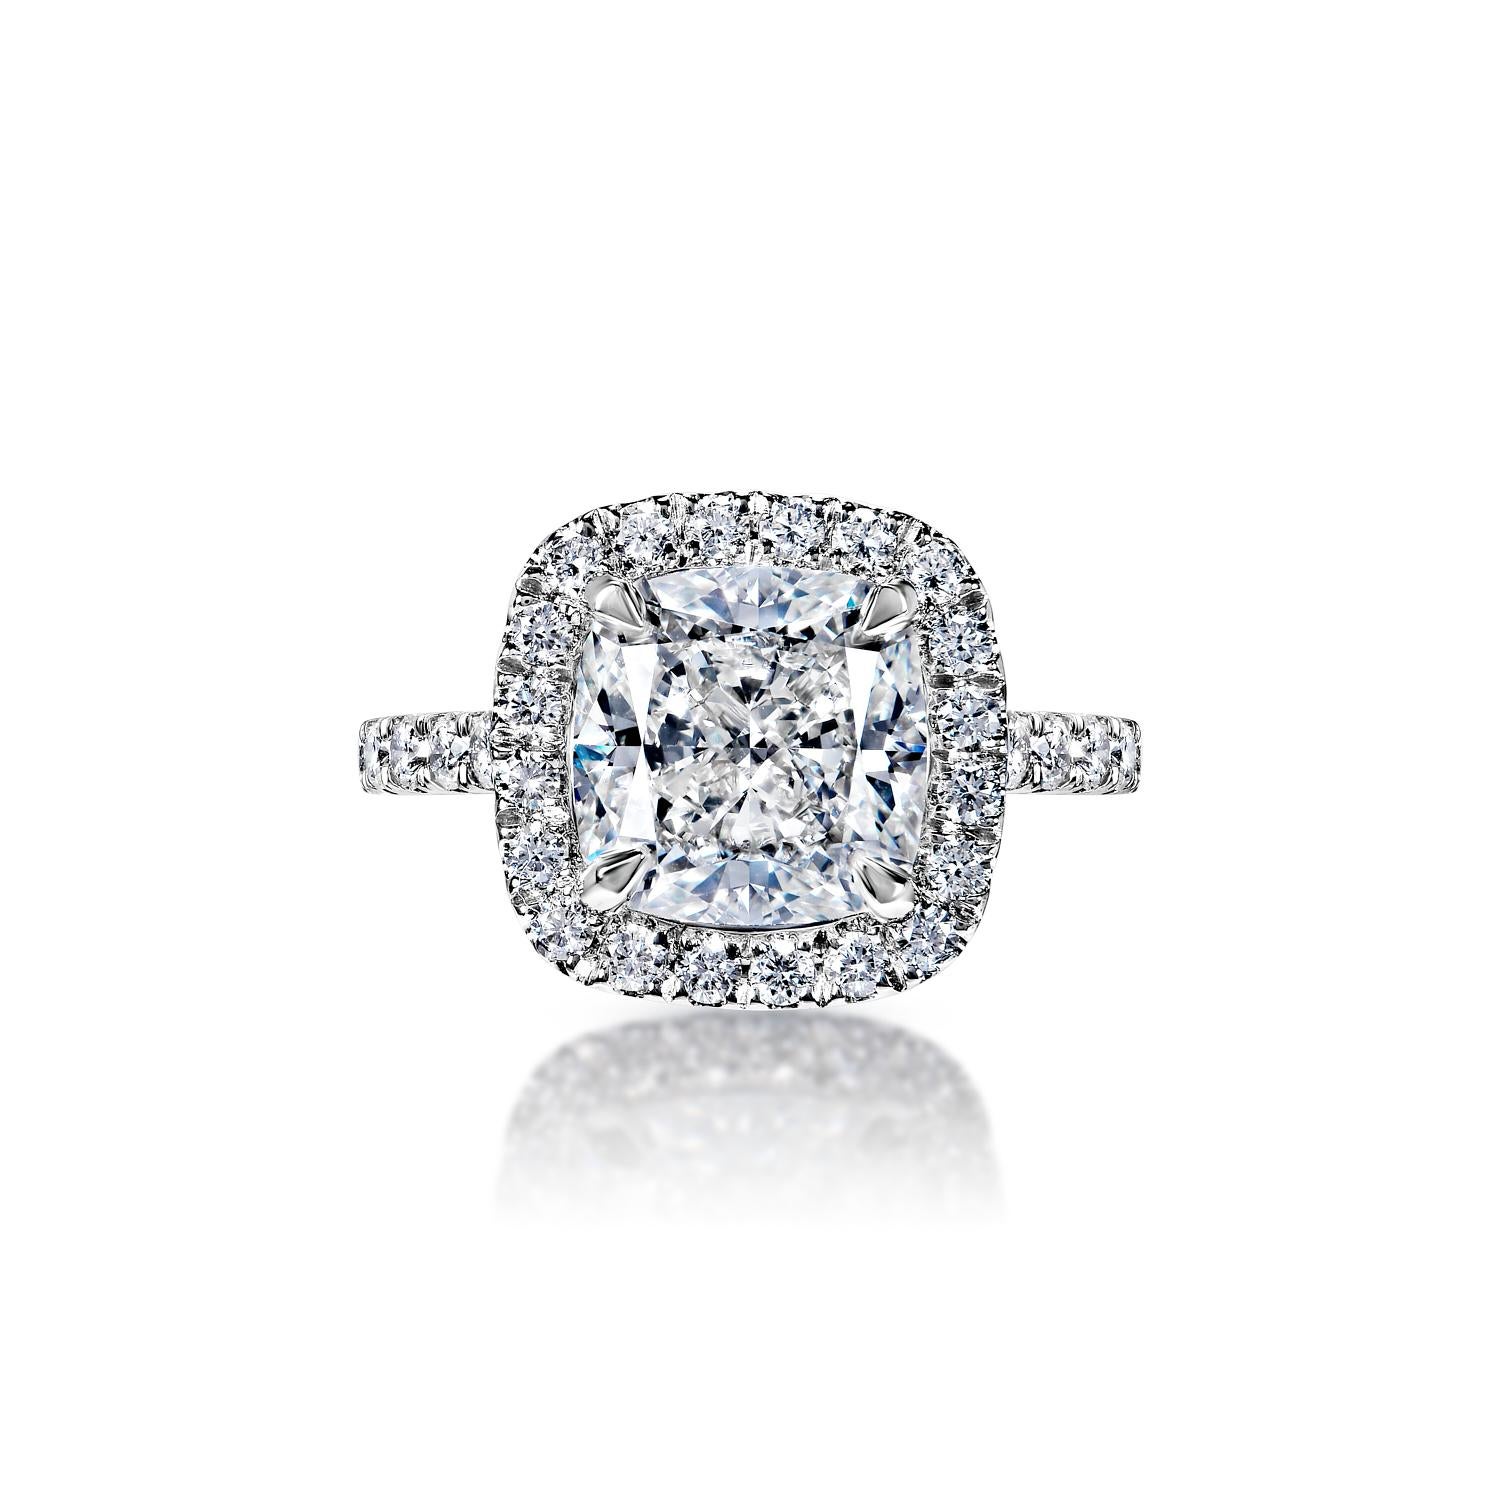 Jayleen 6 Carat I IF Cushion Cut Diamond Engagement Ring in 18k White Gold. GIA Certified. By Mike Nekta

GIA CERTIFIED
Center Diamond:

Carat Weight: 5.12 Carats
Color : I*
Clarity: IF
Style: Cushion Cut
*This Diamond has been treated by one or